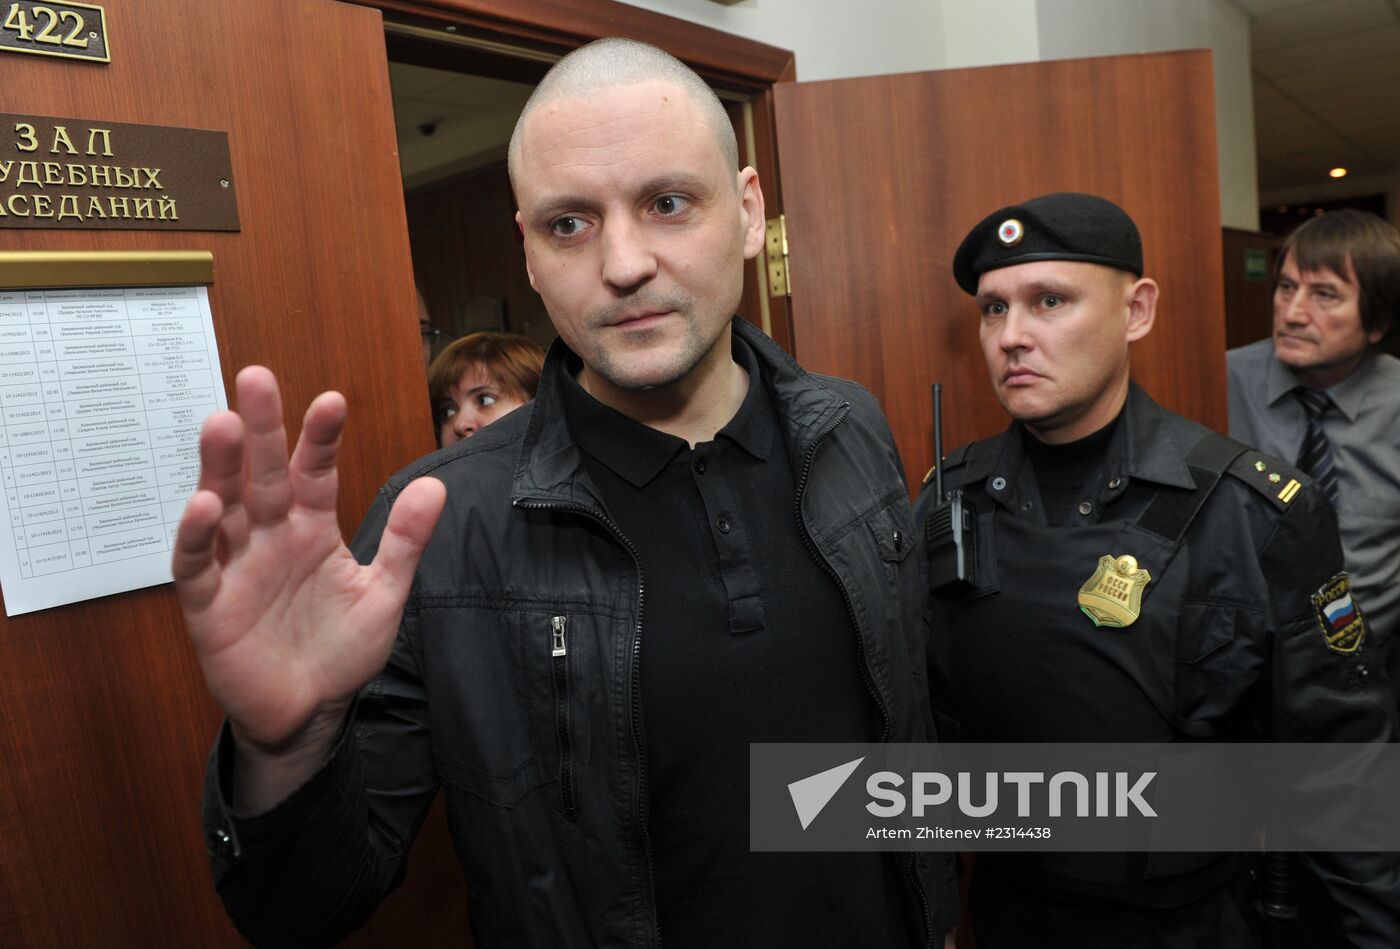 Moscow Court extends house arrest for Sergei Udaltsov